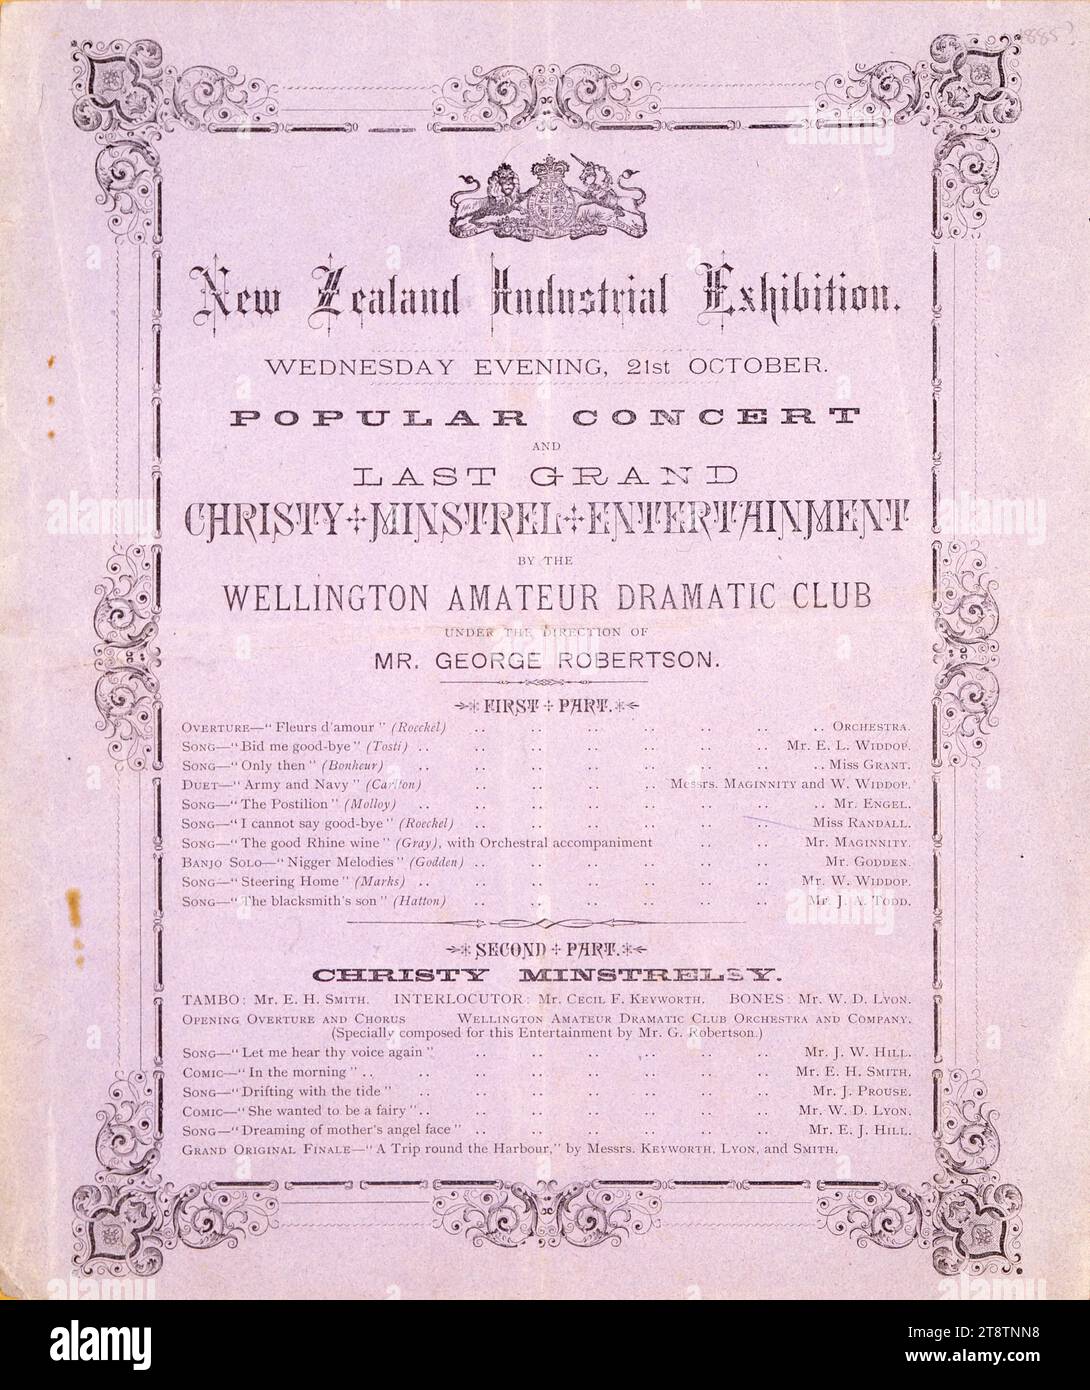 New Zealand Industrial Exhibition: Wednesday evening, 21st October. Popular concert and last grand Christy Minstrel Entertainment by the Wellington, New Zealand Amateur Dramatic Club under the direction of Mr George Robertson. Programme flyer. 1885, An arrangement of text with a decorative border. Performers included: Mr E L Widdop, Miss Grant, Mr Maginnity, Mr Engel, Miss Randall, Mr Godden, Mr W Widdop, Mr J A Todd. In the Christy Minstrelsy section performers included Mr E H Smith (as Tambo), Mr Cecil F Keyworth (as interlocutor), Mr W D Lyon (as Bones), with Mr J W Hill, Mr E H Smith Stock Photo